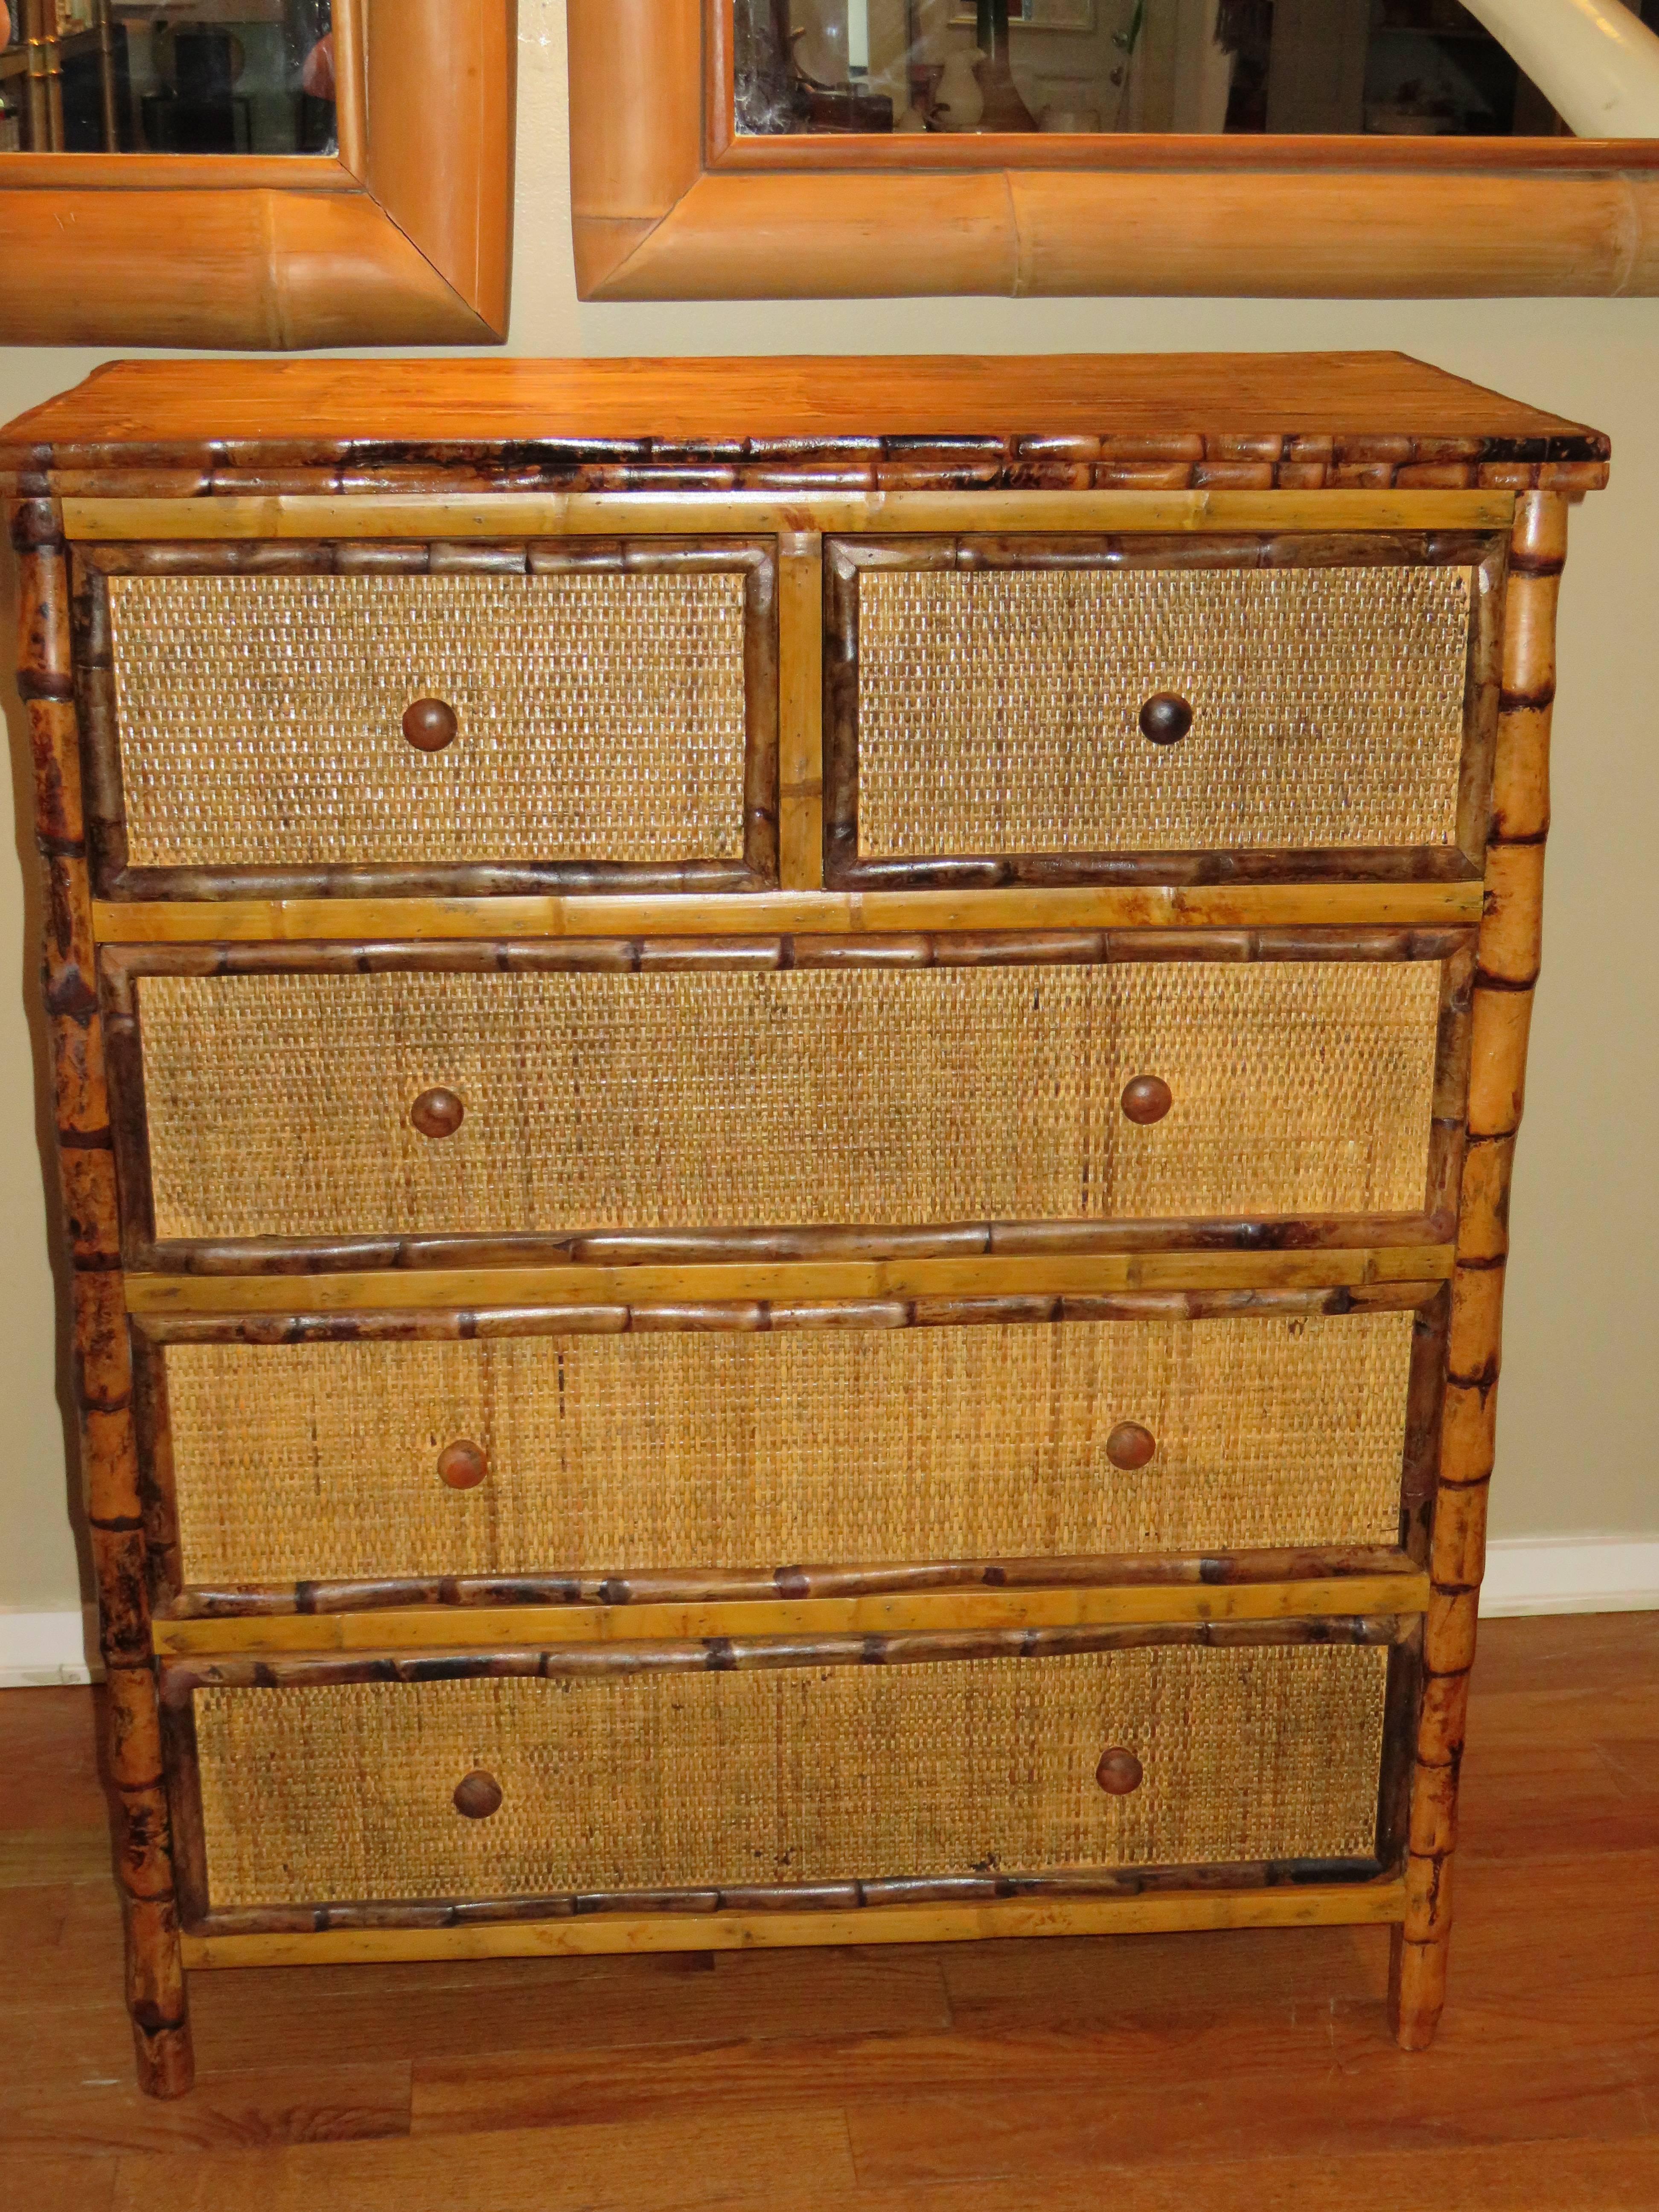 20th Century Bamboo and Cane  British Colonial Style Dresser or Drawers